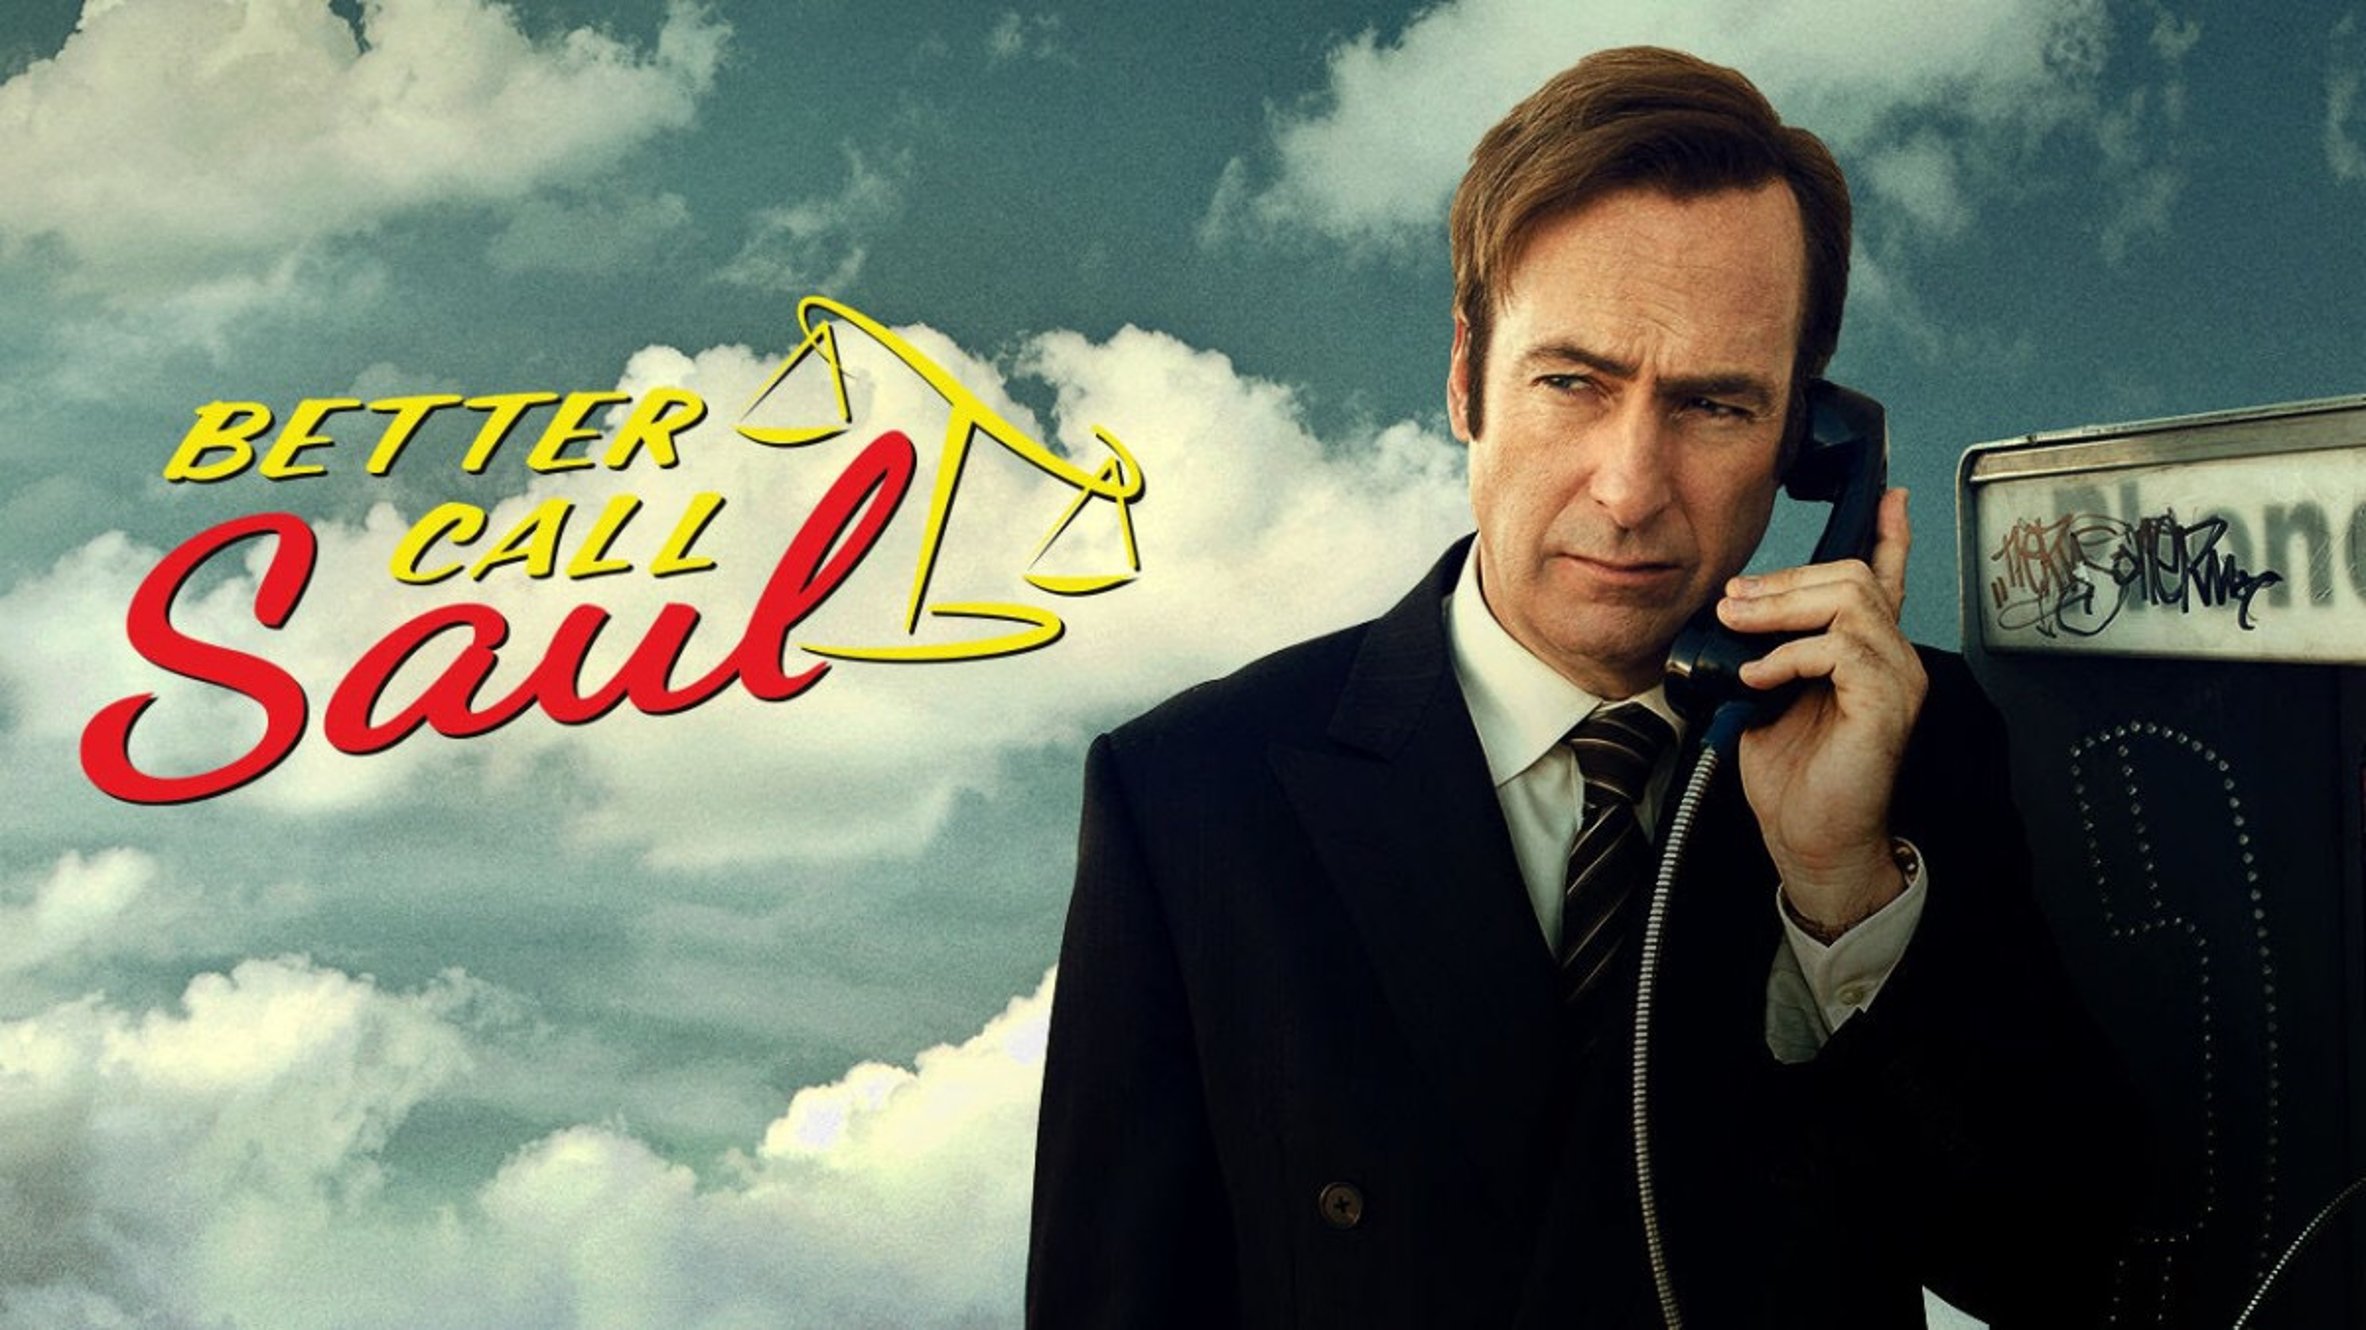 Casting Extras for Better Call Saul